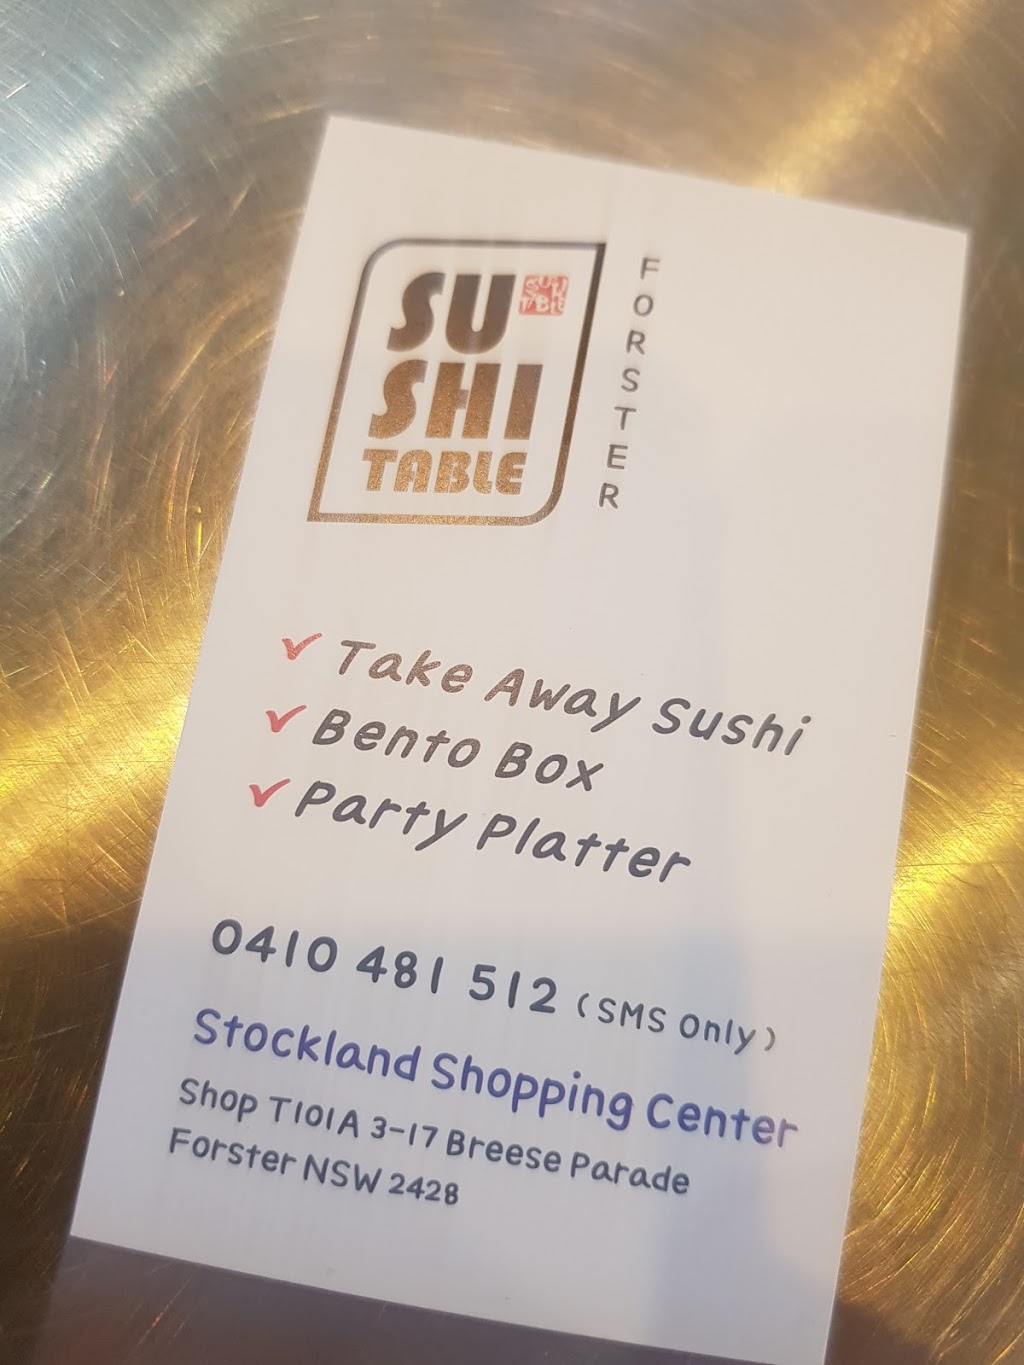 Sushi Table | restaurant | shop 101t/3-17 Breese Parade, Forster NSW 2428, Australia | 0410481512 OR +61 410 481 512